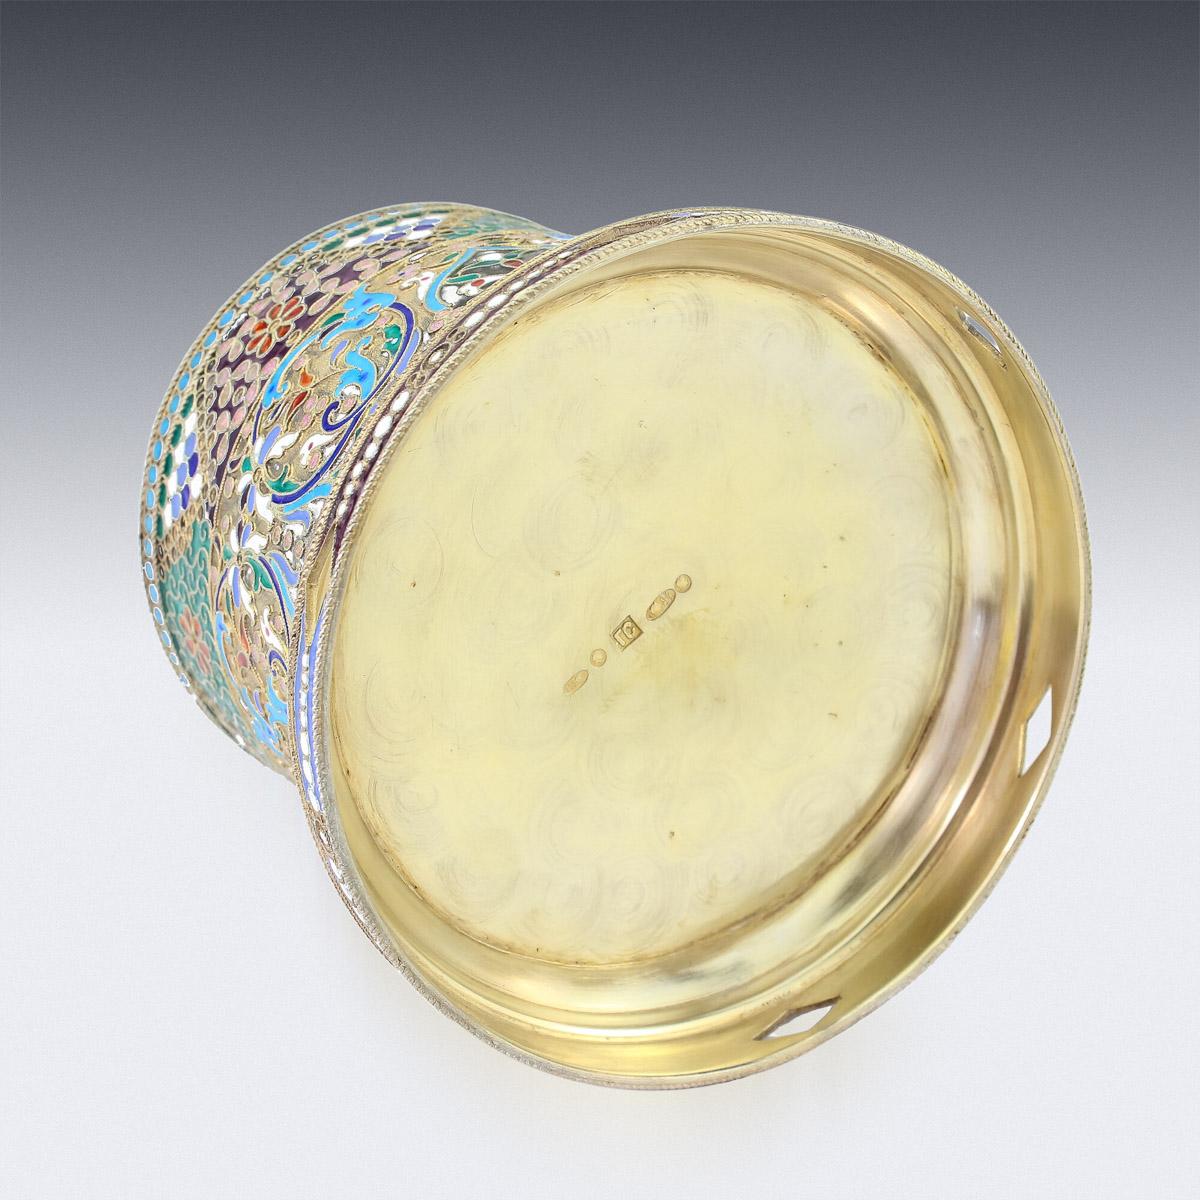 20th Century Imperial Russian Solid Silver-Gilt Enamel Tea Glass Holder, c.1900 6